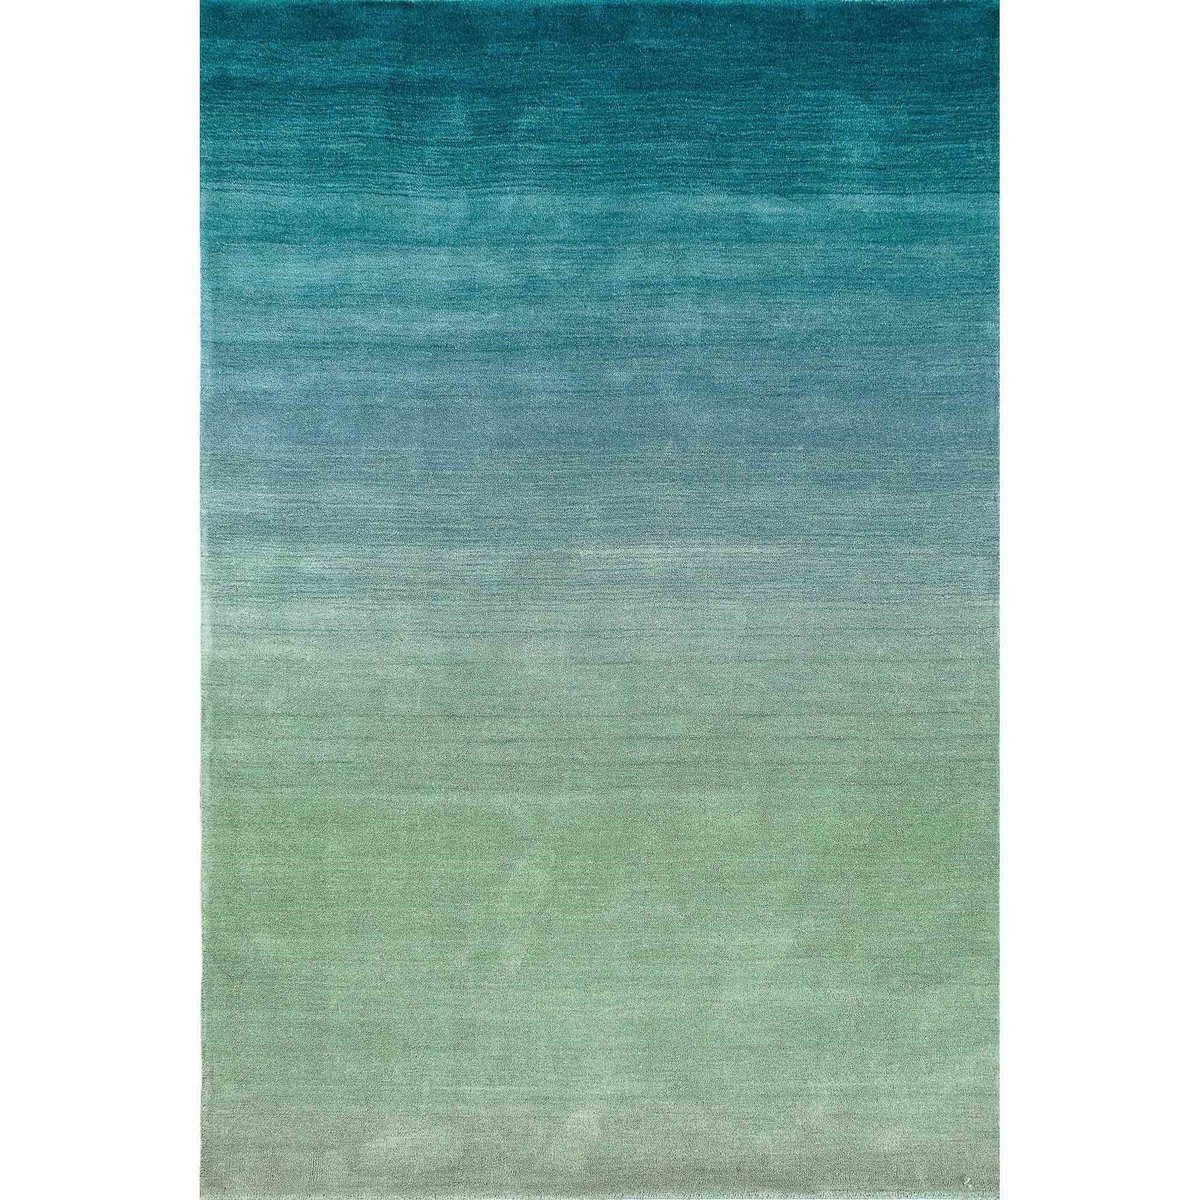 Liora Manne Arca Ombre Rugs Direct, Navy Blue Ombre Area Rug